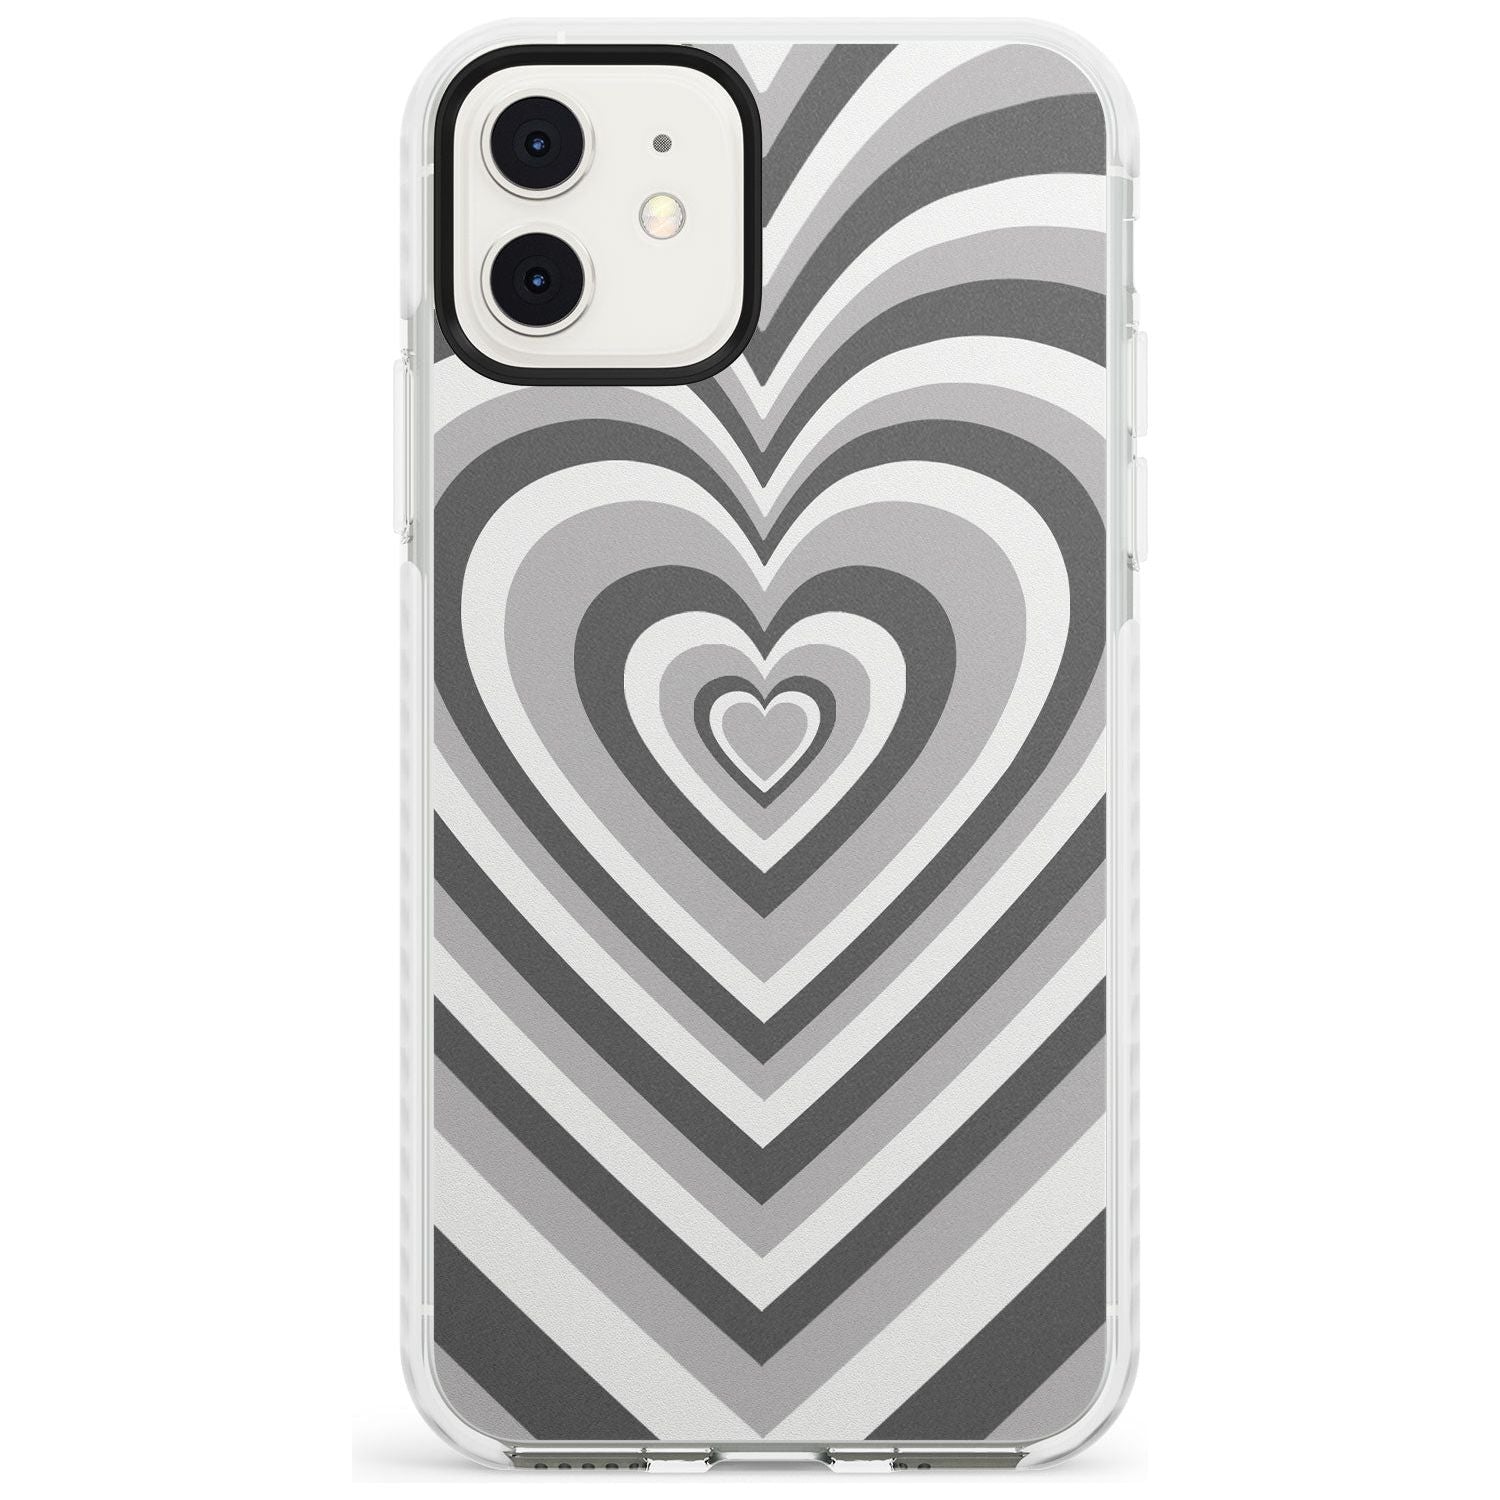 Monochrome Heart Illusion Impact Phone Case for iPhone 11